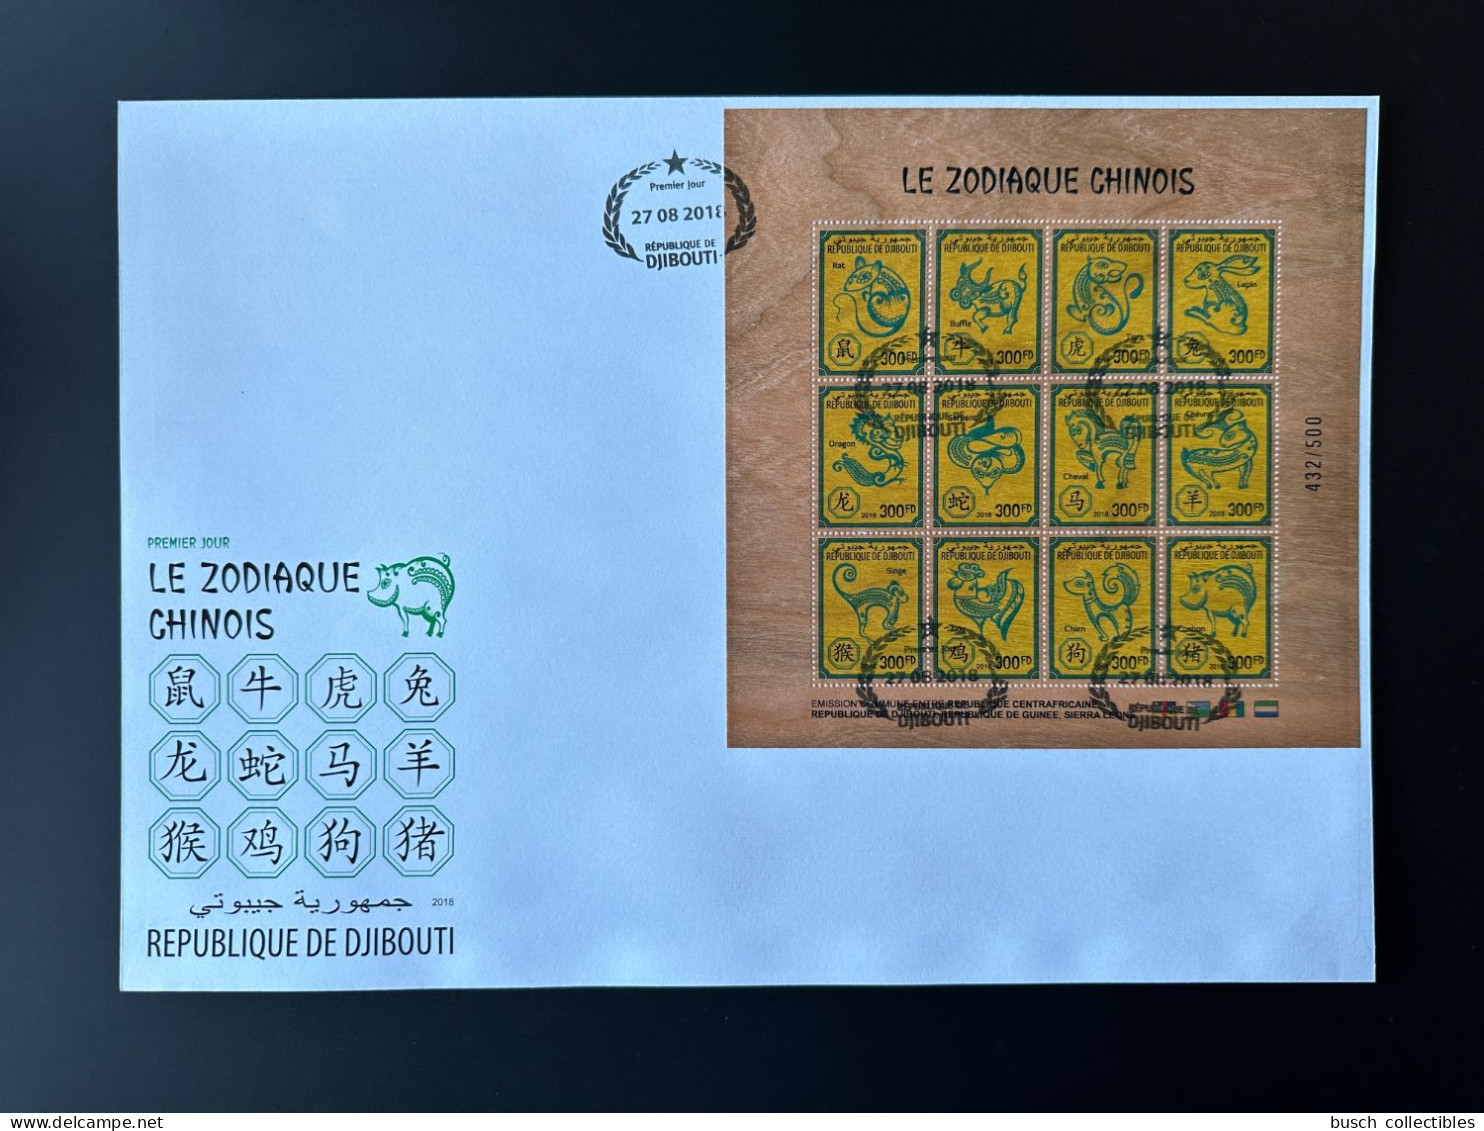 Djibouti Dschibuti 2018 FDC Wooden Holzfurnier Bois Chinese Zodiac Zodiaque Chinois Joint Issue Emission Commune - Emissions Communes